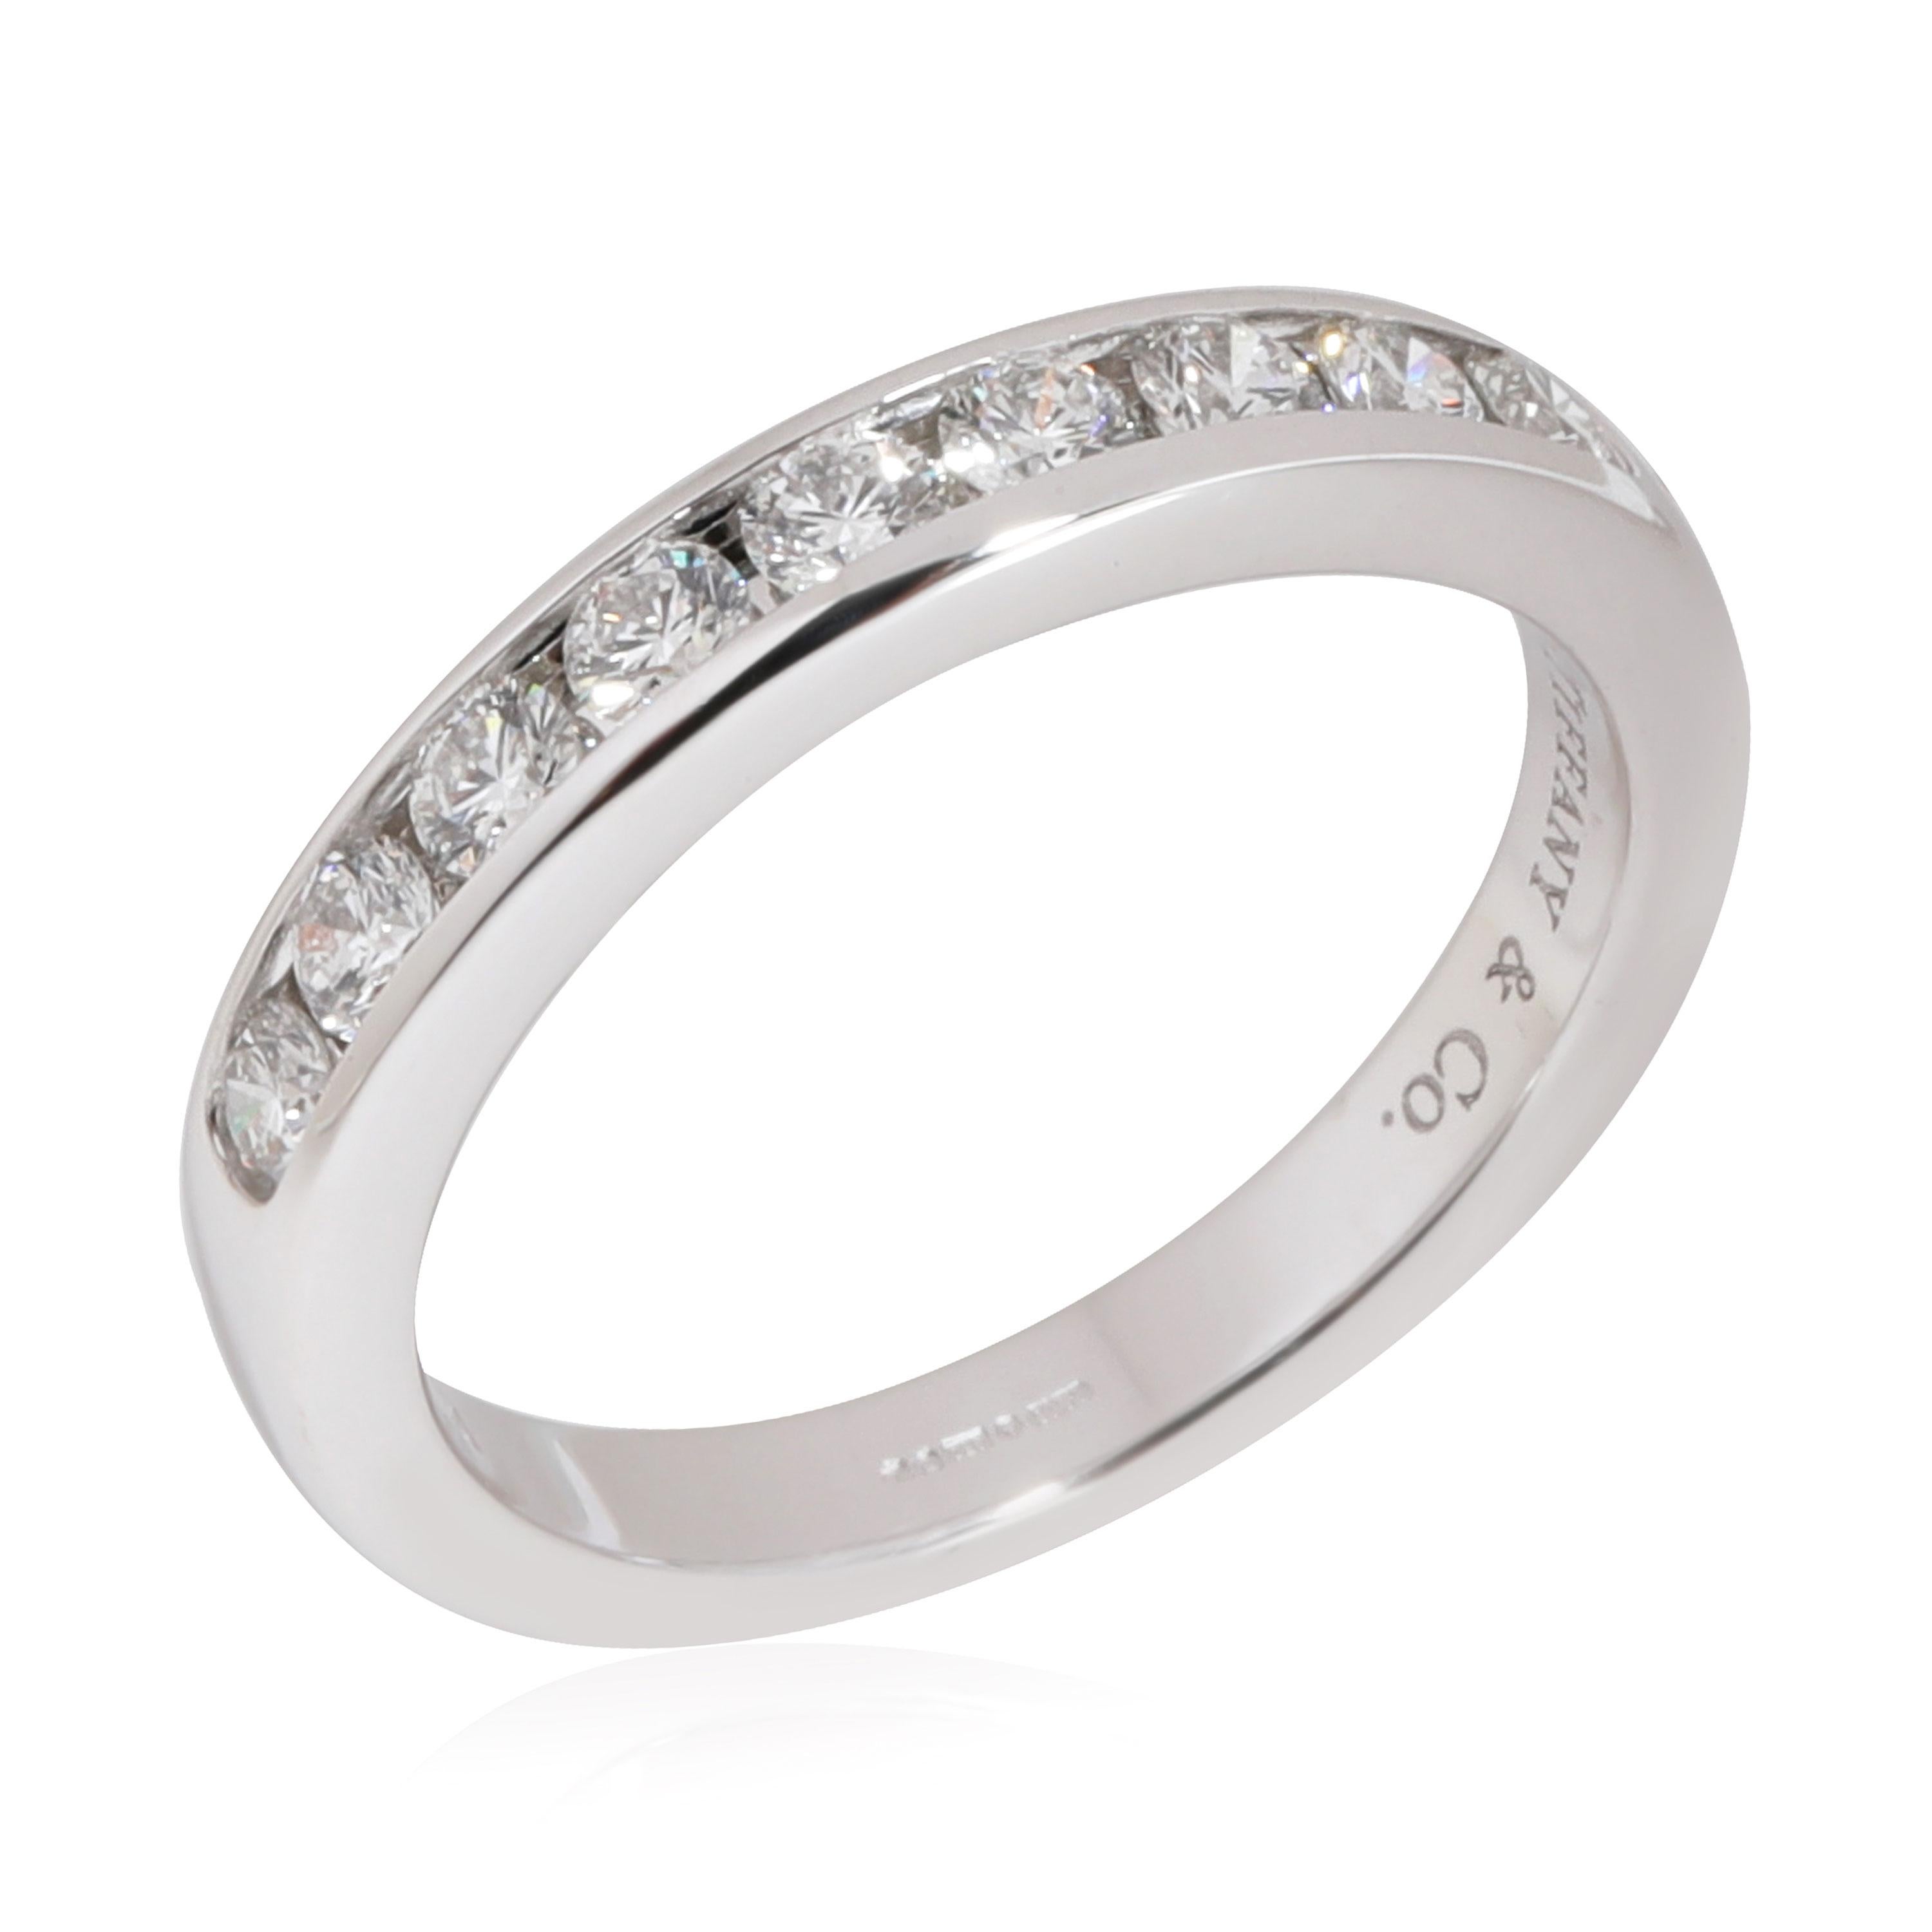 Tiffany & Co. Channel Set Diamond Wedding Band in Platinum 0.35 CTW

PRIMARY DETAILS
SKU: 114485
Listing Title: Tiffany & Co. Channel Set Diamond Wedding Band in Platinum 0.35 CTW
Condition Description: Retails for 3700 USD. In excellent condition